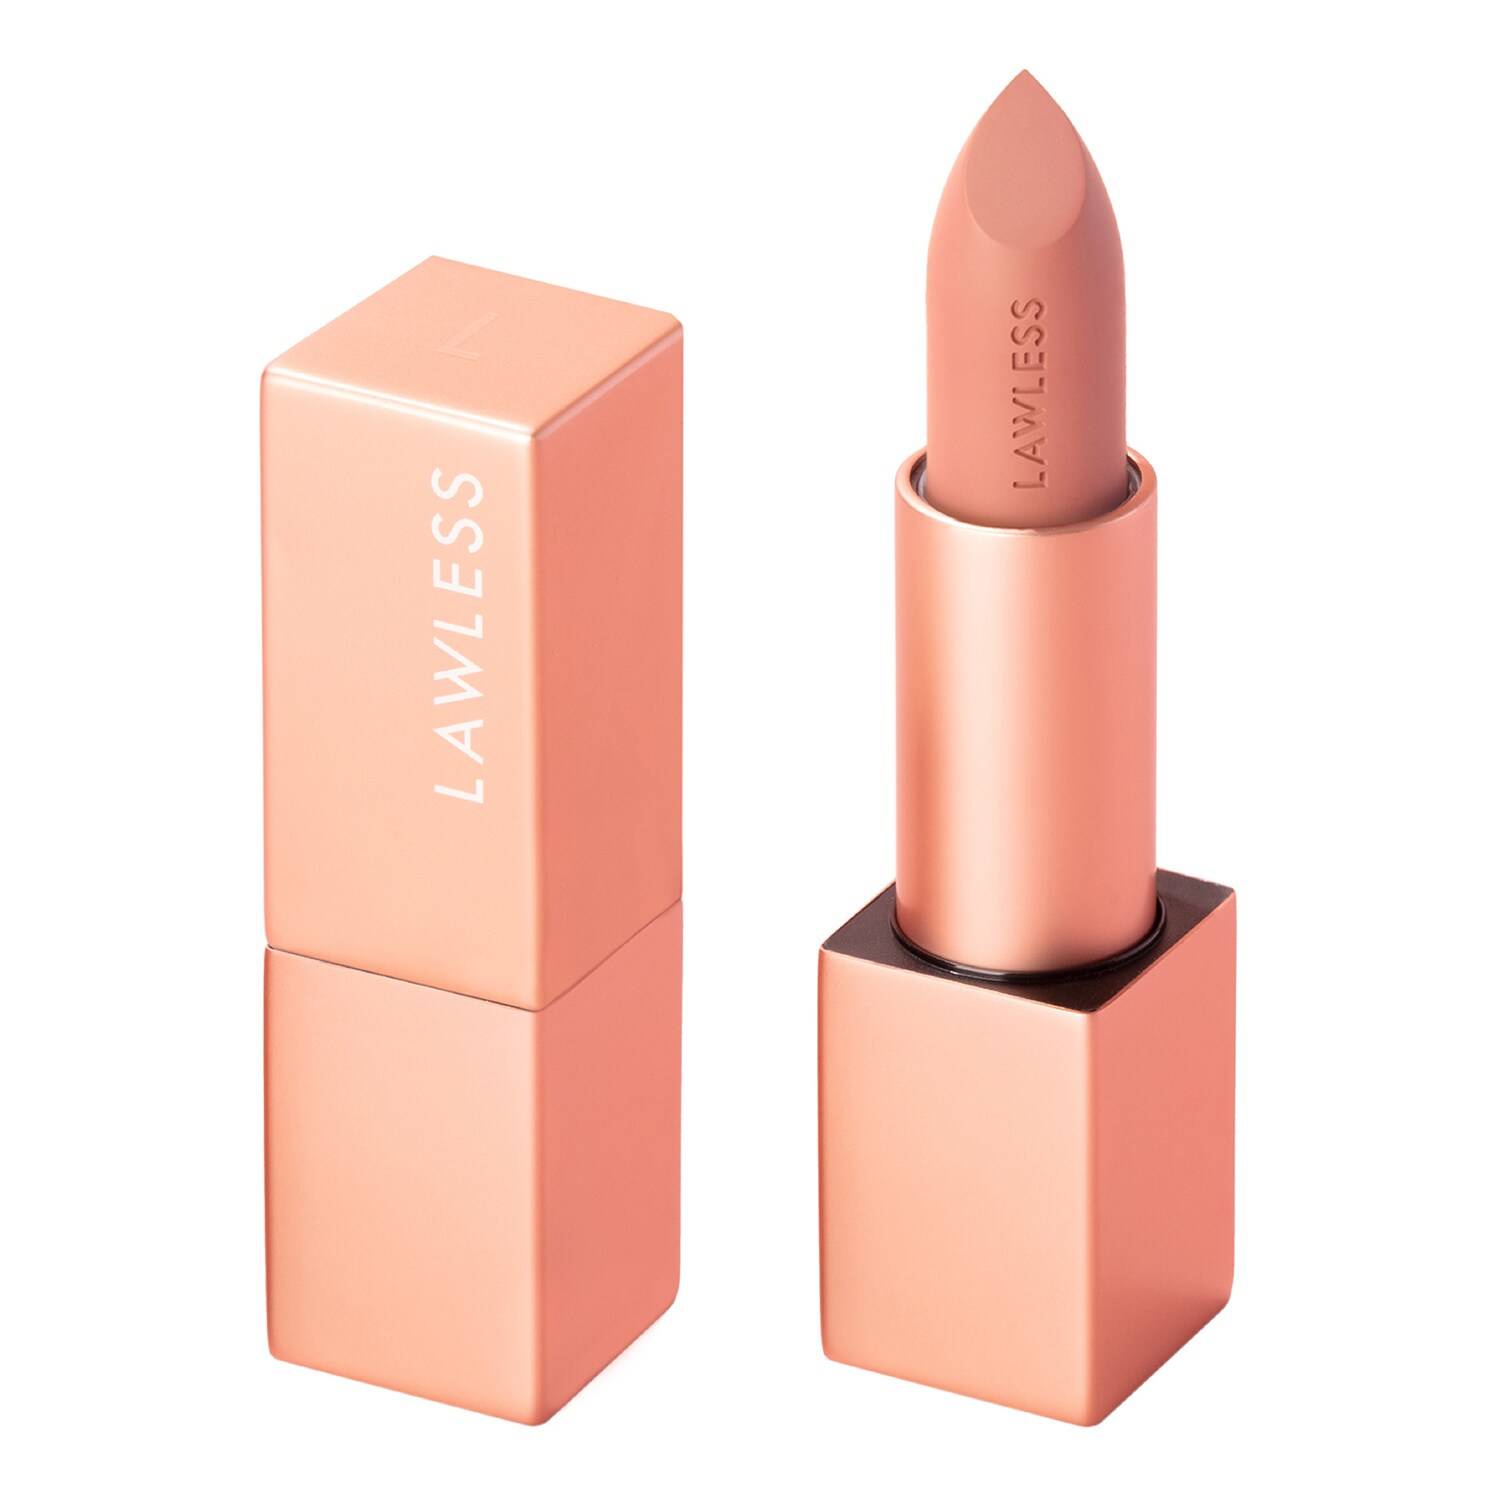 Lawless Beauty Forget The Filler Lip Plumping Line-Smoothing Satin Cream Lipstick 3.7G Soft Truffle